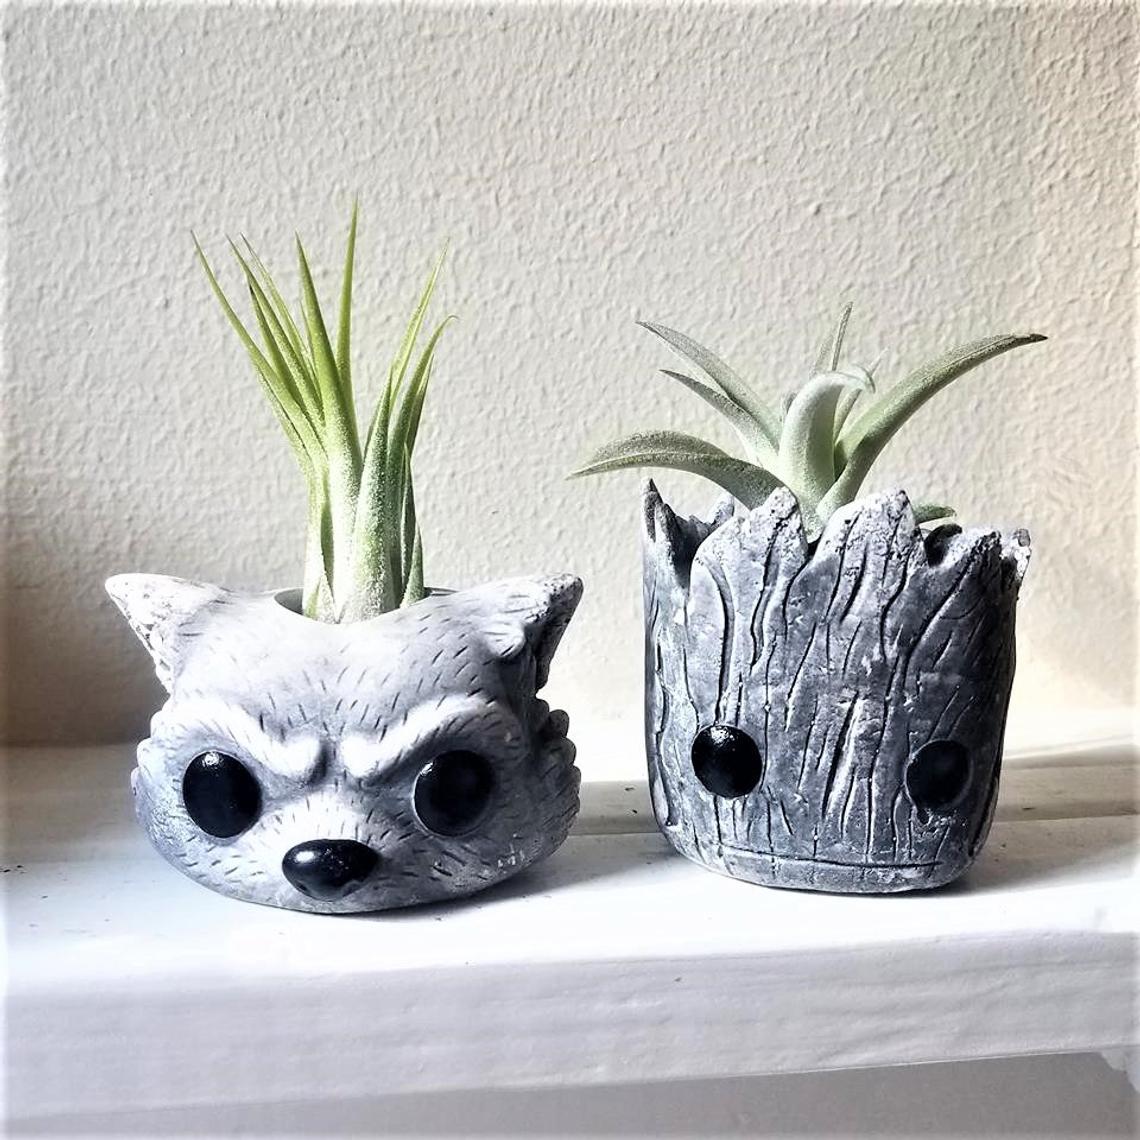 Geeky Planters